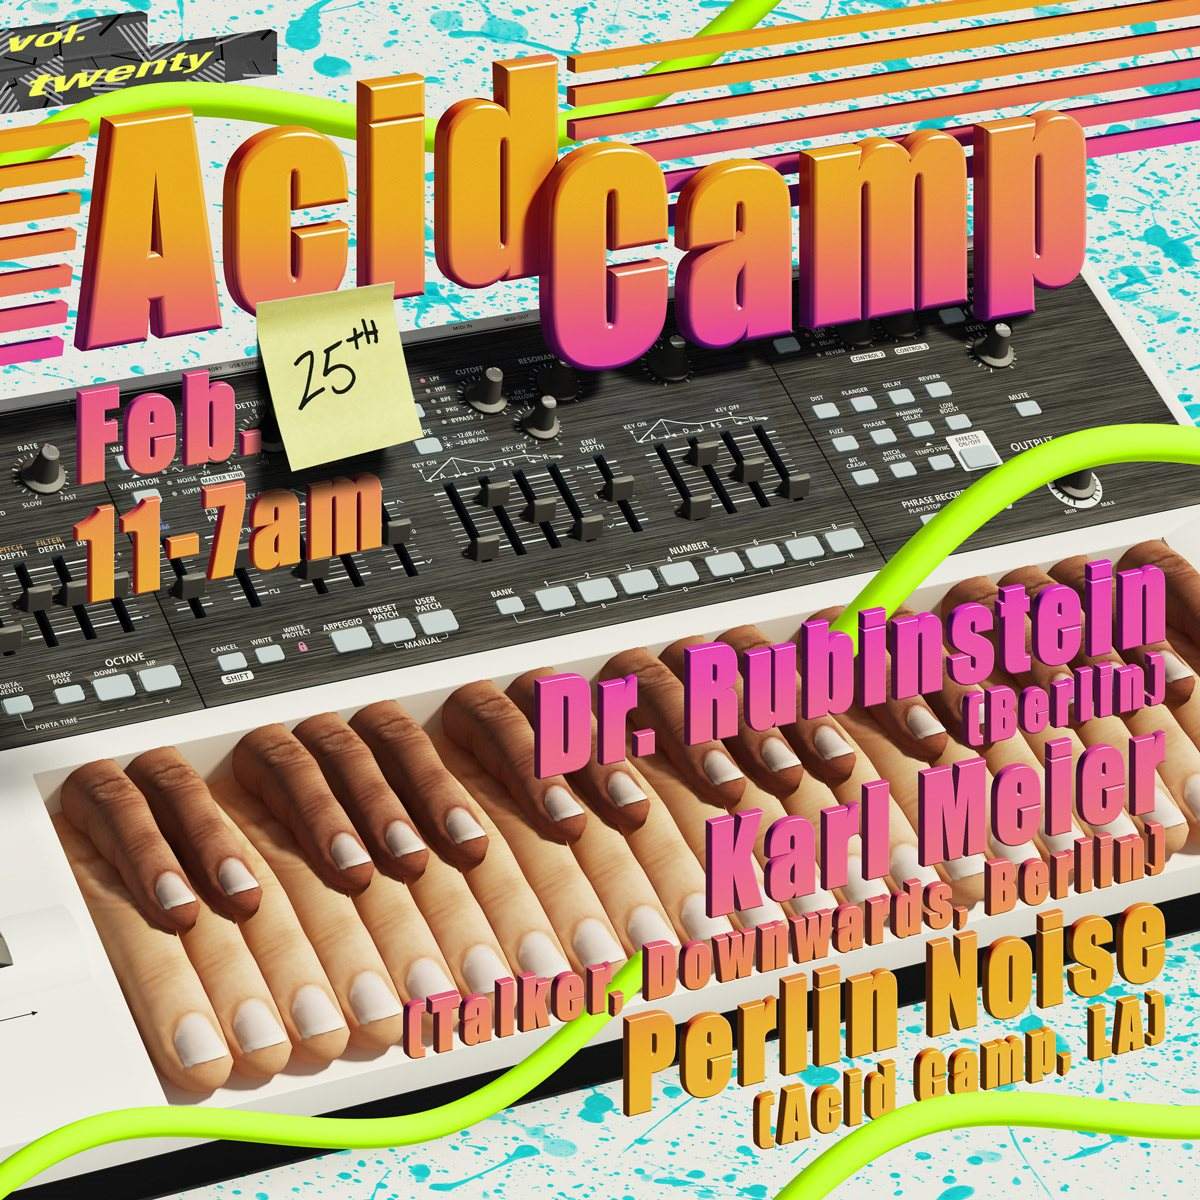 Acid Camp with Karl Meier, Perlin Noise - フライヤー表